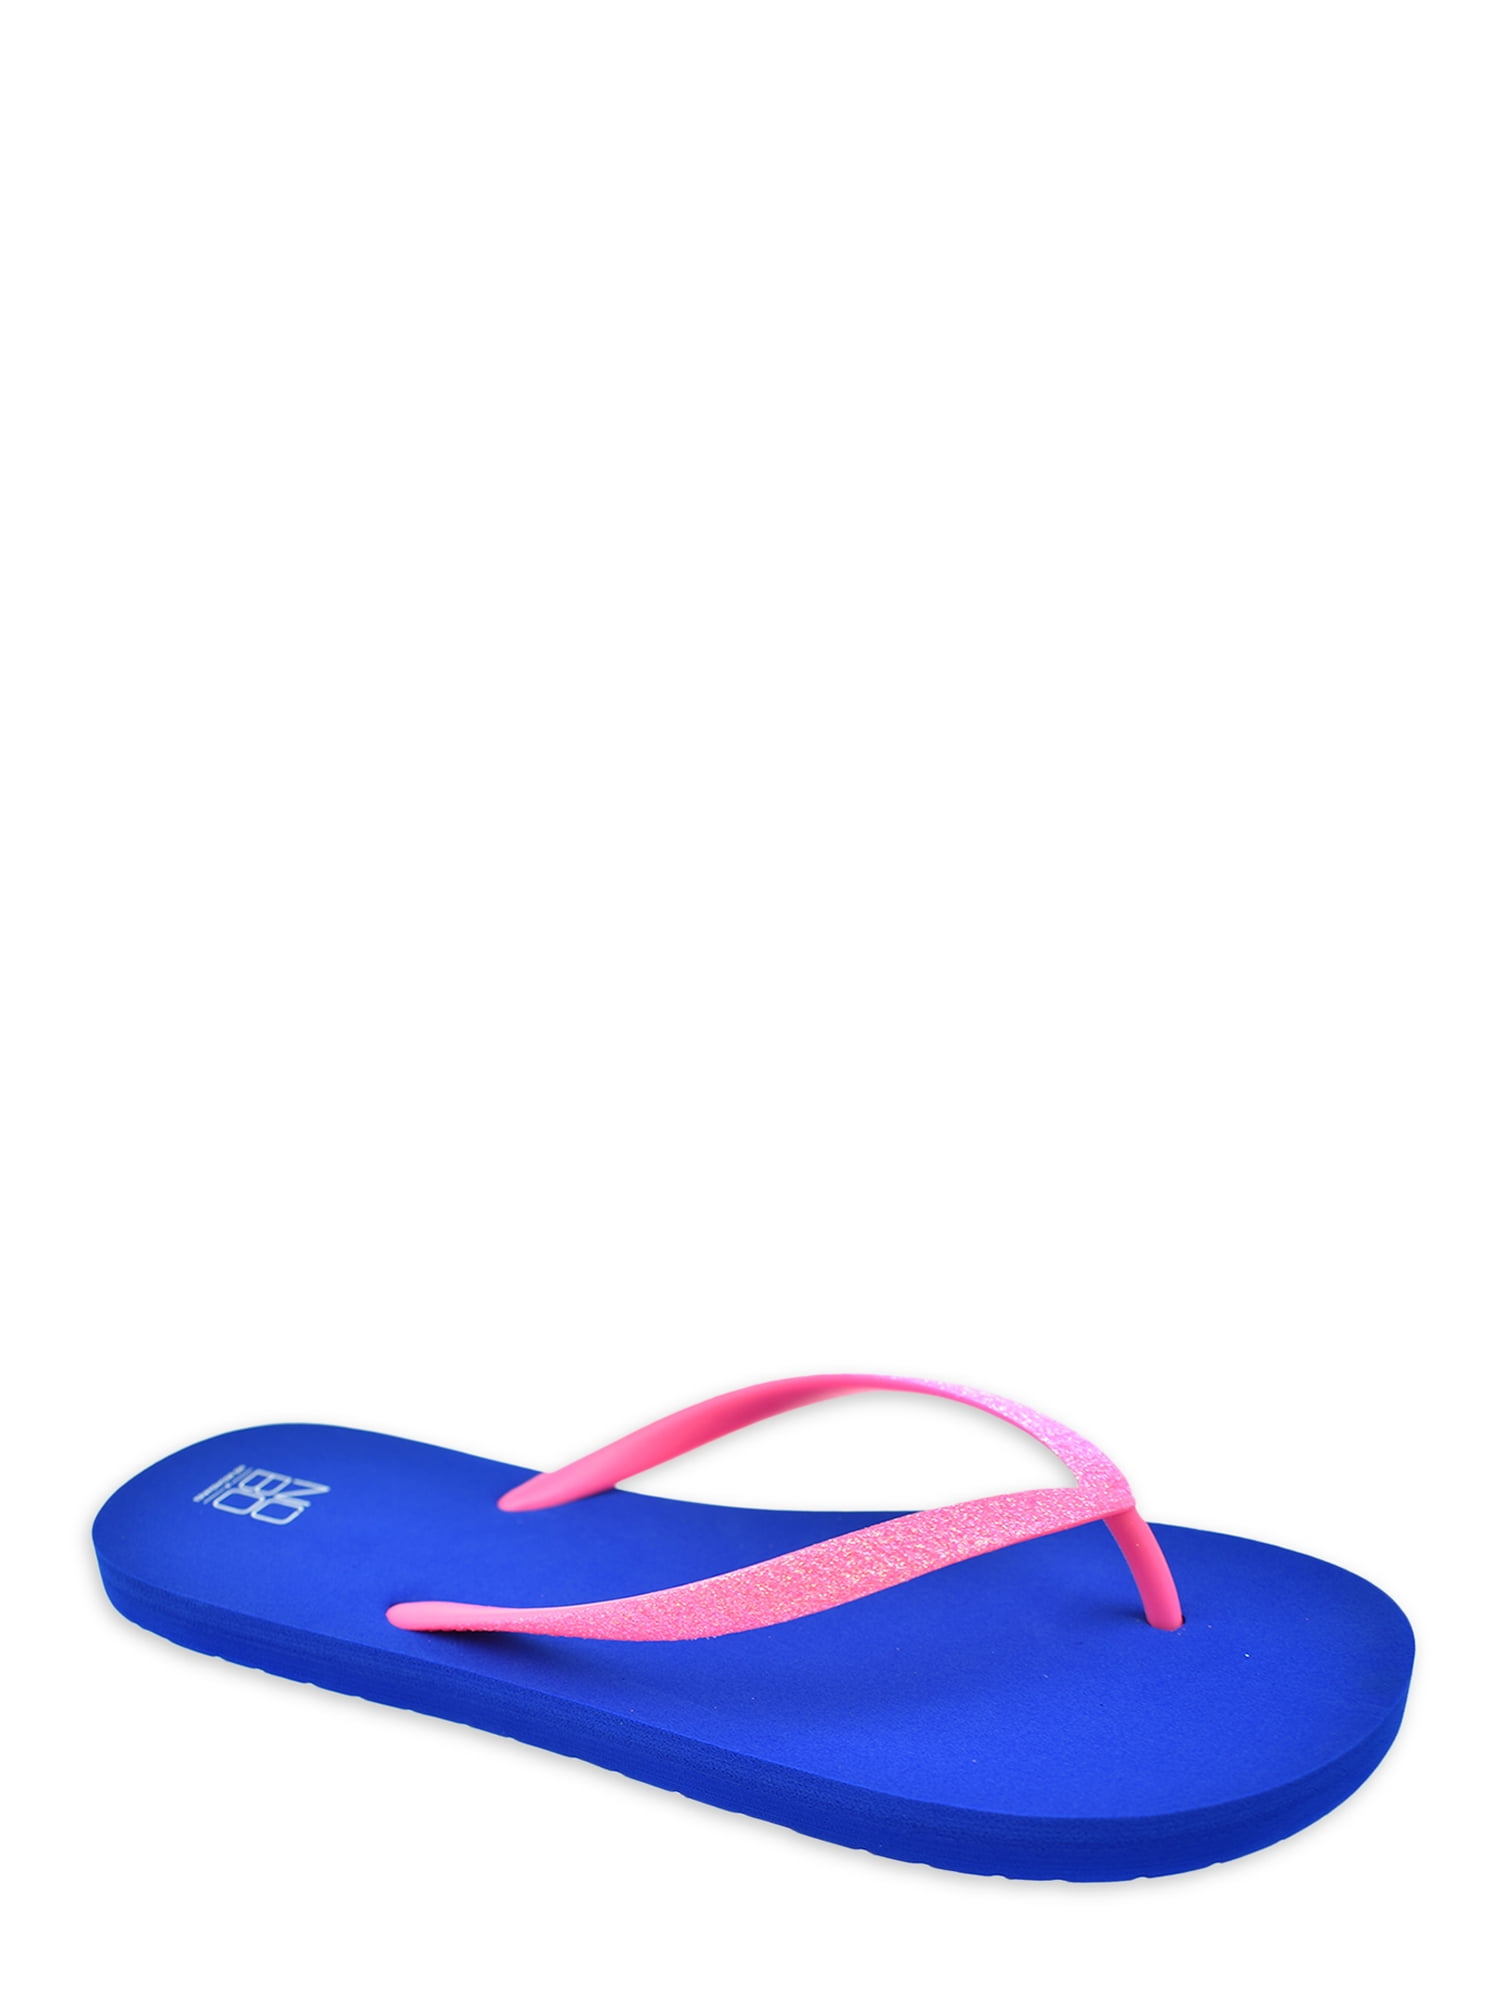 Womens Shoes Flats and flat shoes Sandals and flip-flops adidas Synthetic Eezay Flip-flops in Blue 